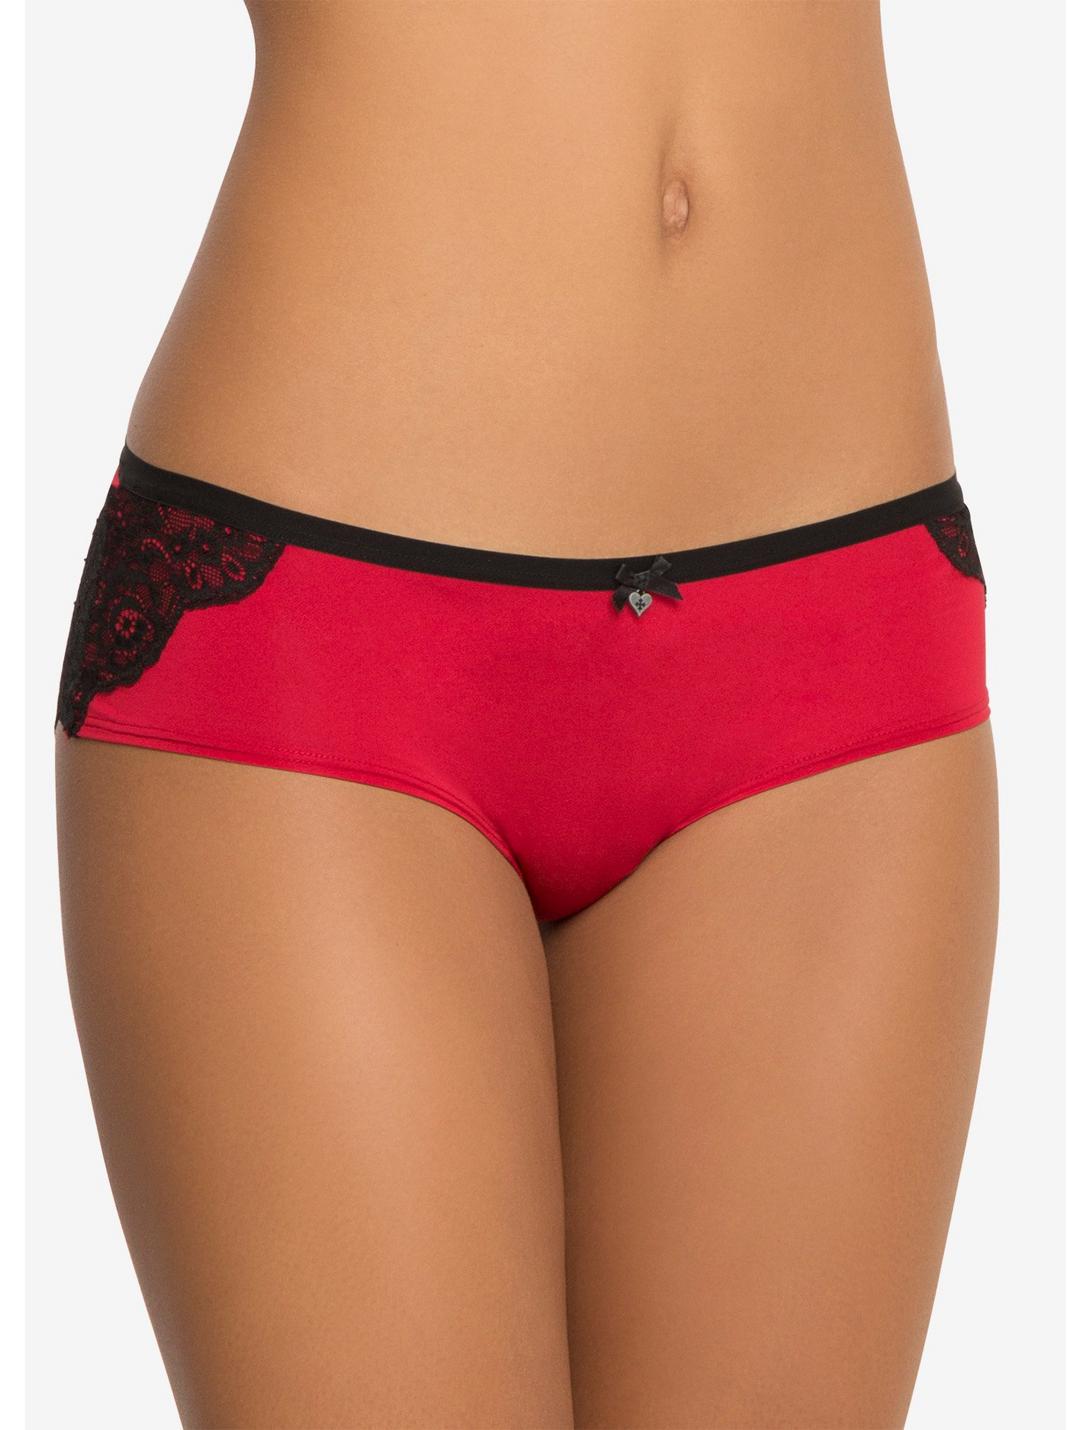 Microfiber & Lace Cheekster Panty, RED, hi-res